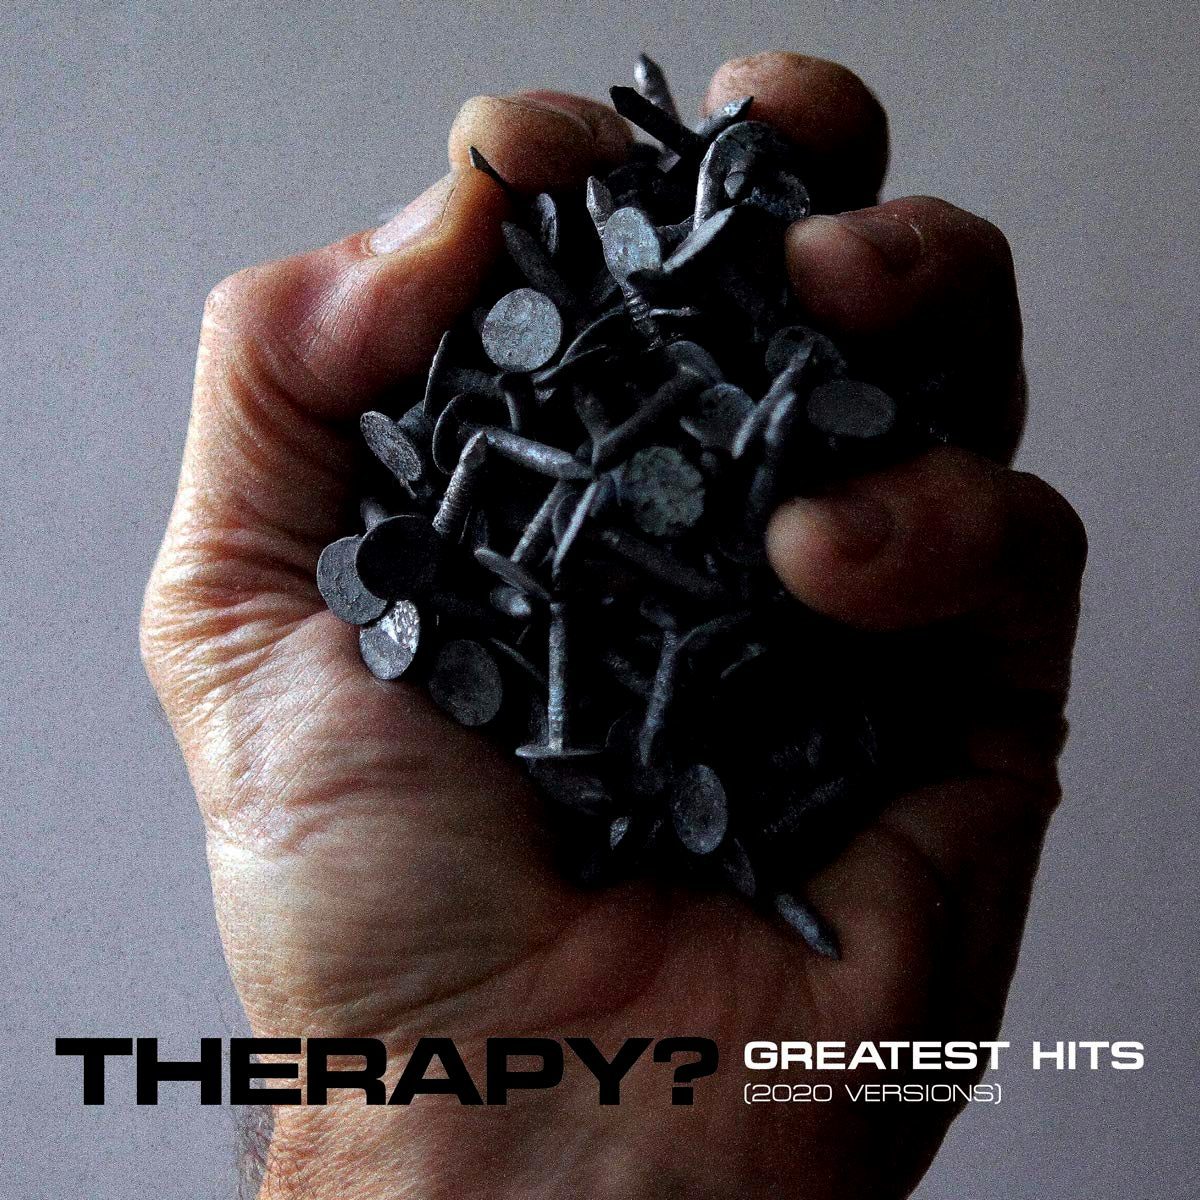 THERAPY? - GREATEST HITS ABBEY ROAD SESSIONS (2020) - LP SIFIR PLAK